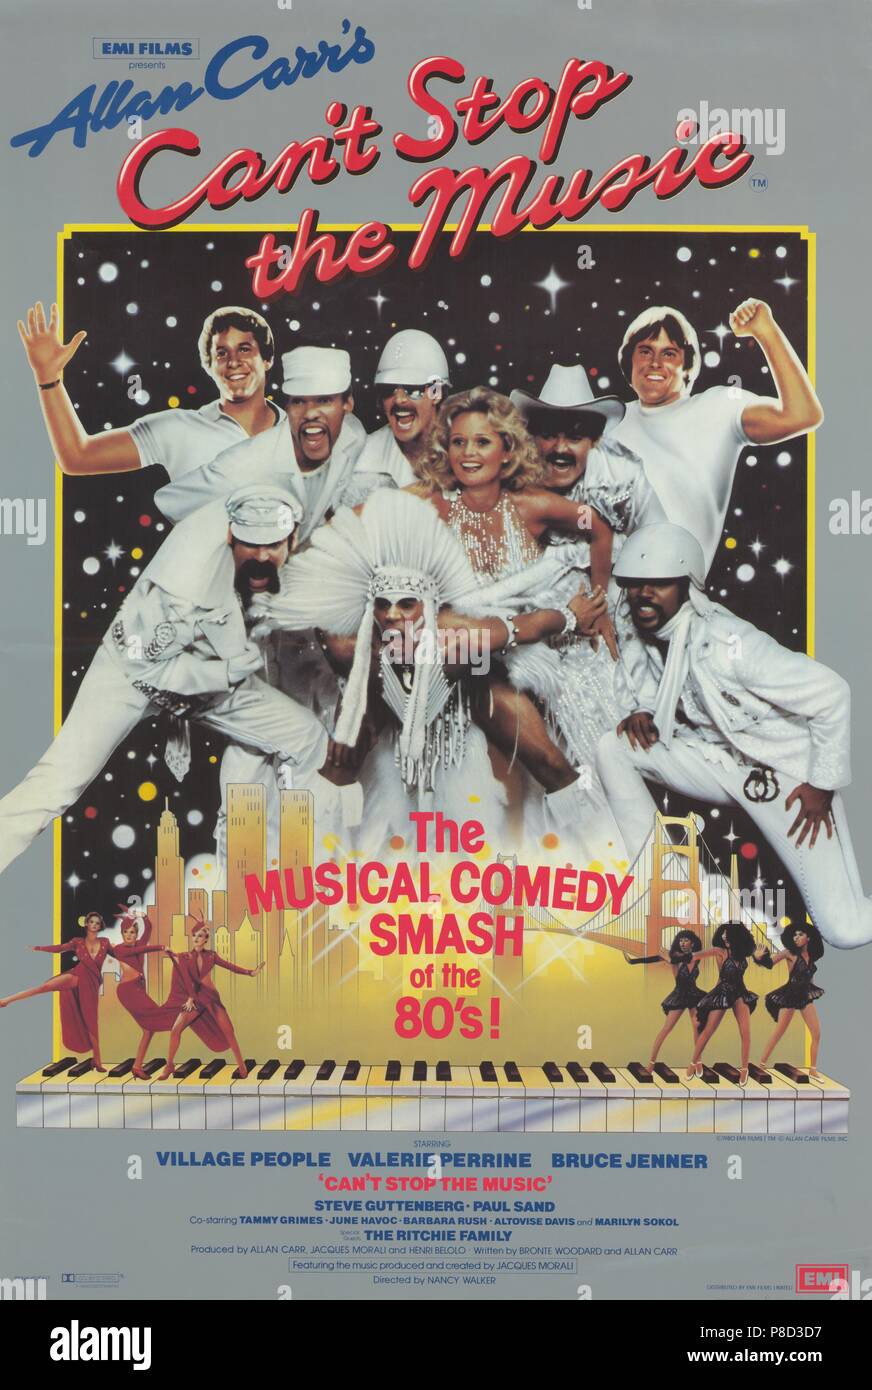 Can't Stop the Music (1982) Village People, Valerie Perrine, Film poster     Date: 1980 Stock Photo